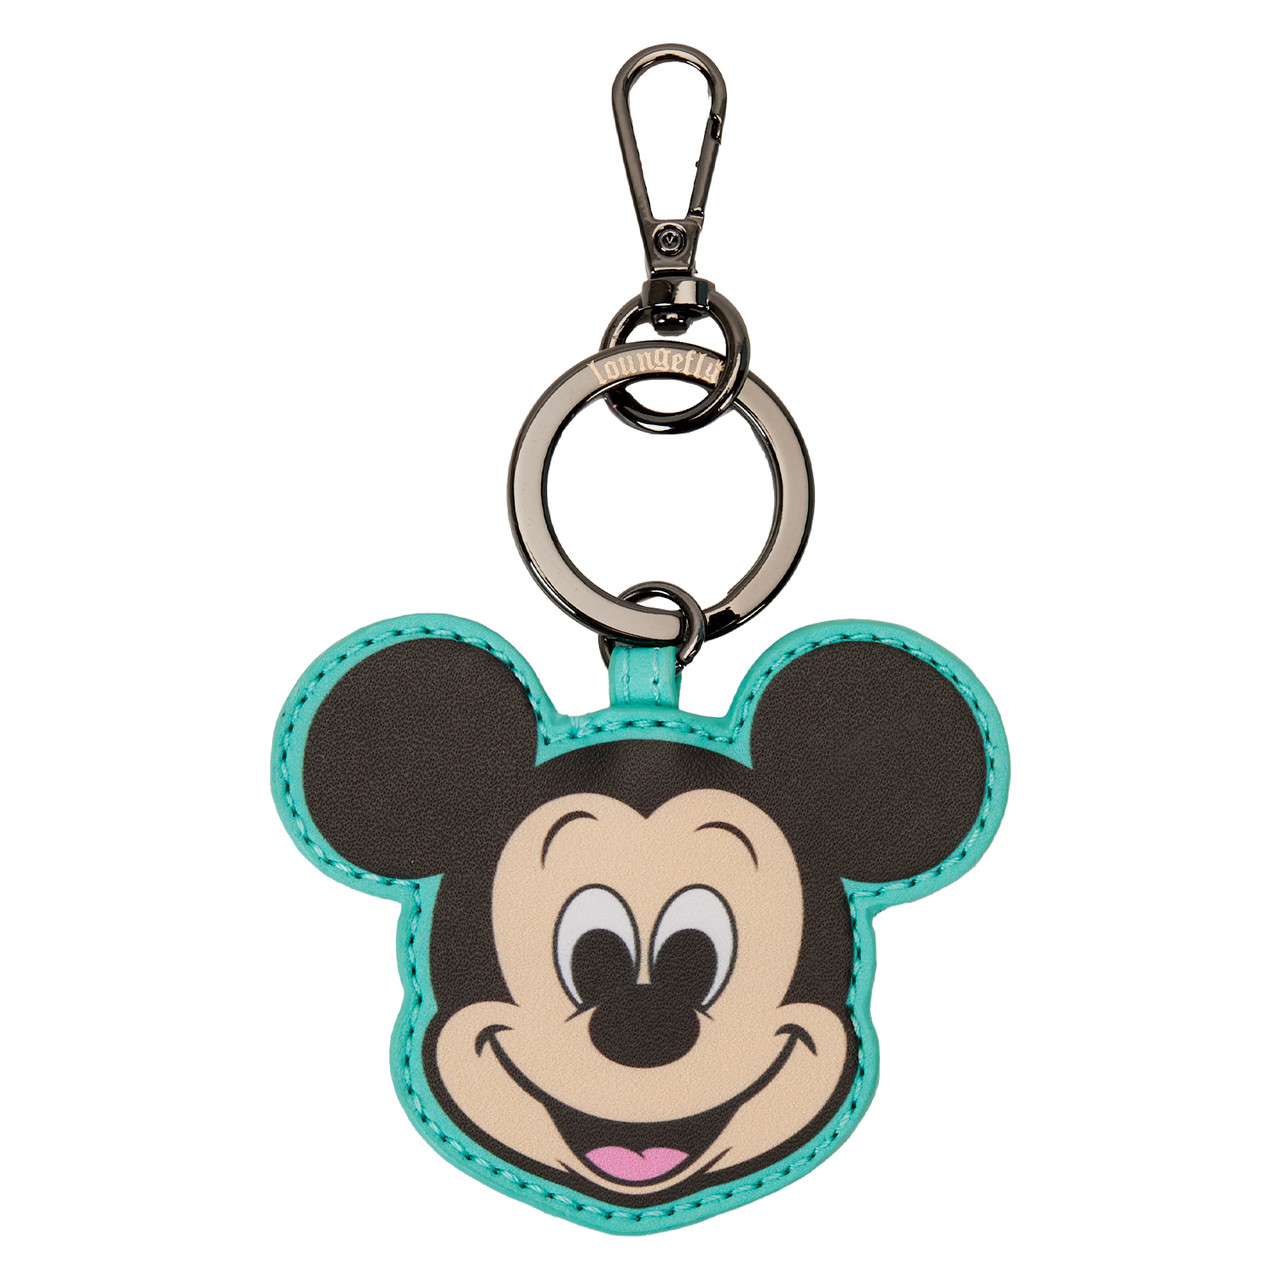 Buy Disney100 Mickey Mouse Classic Tassle Bag Charm at Loungefly.